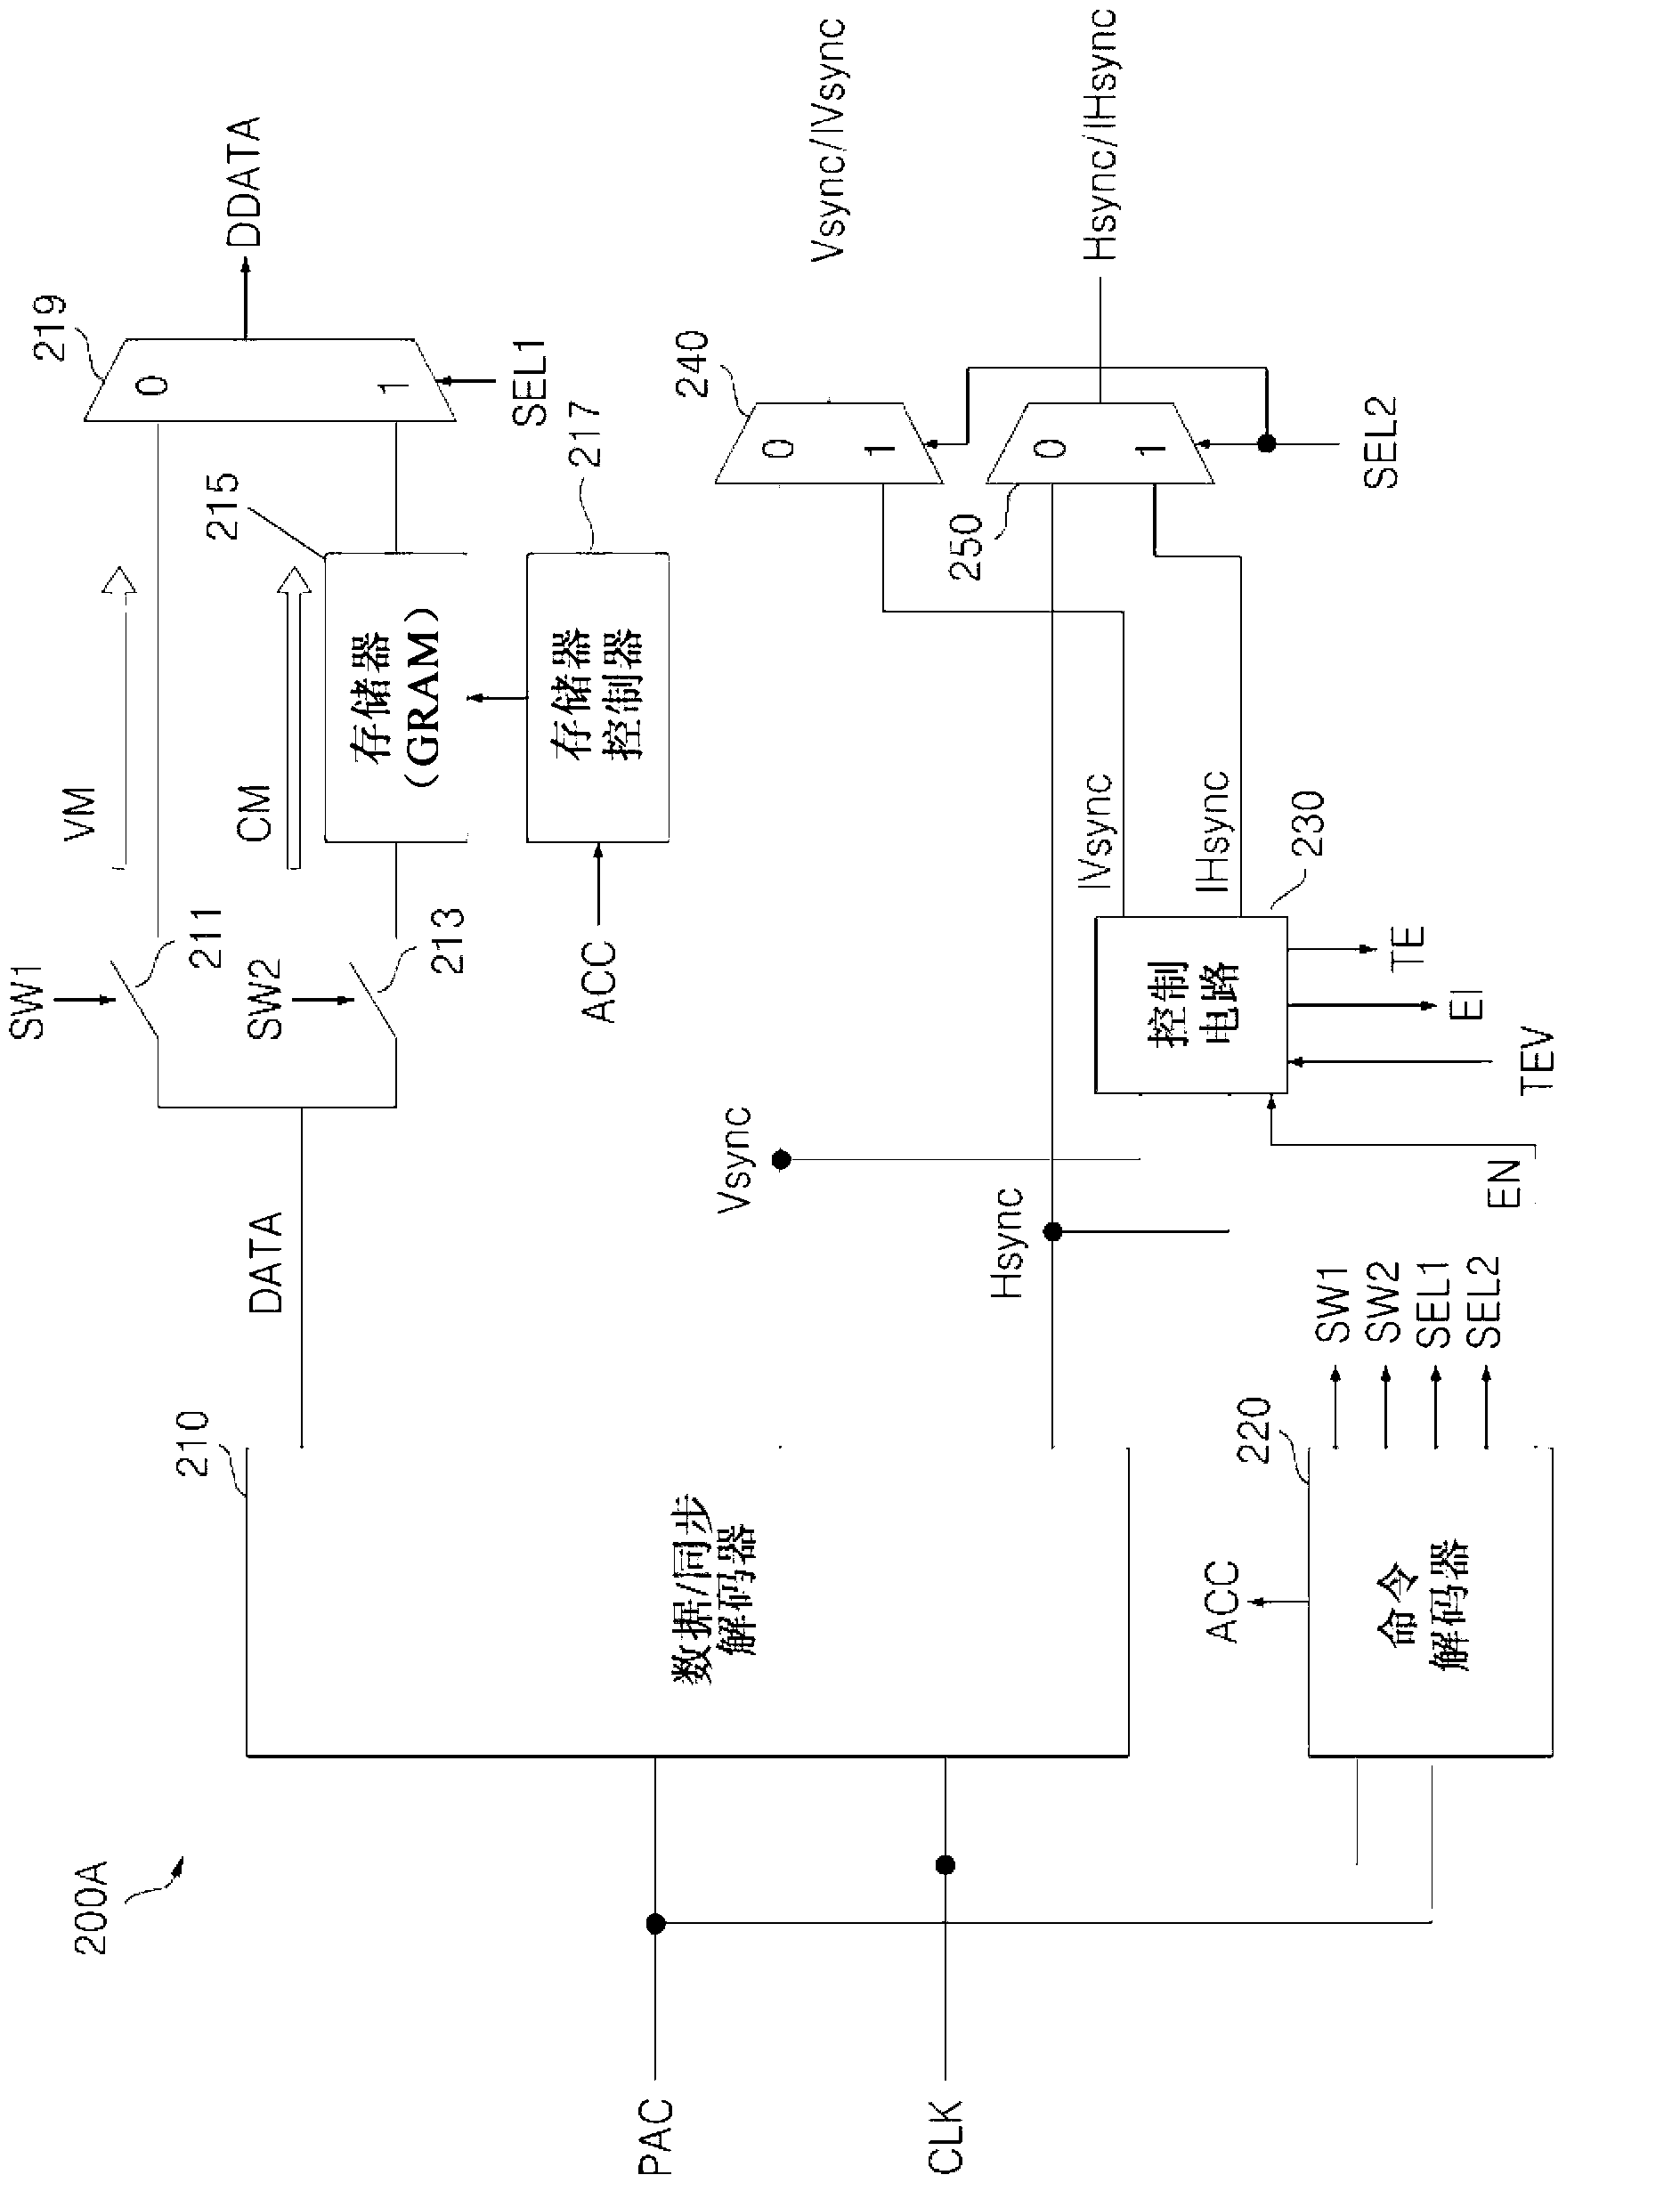 Display driver, operating method thereof, host for controlling the display driver, and system having the display driver and the host